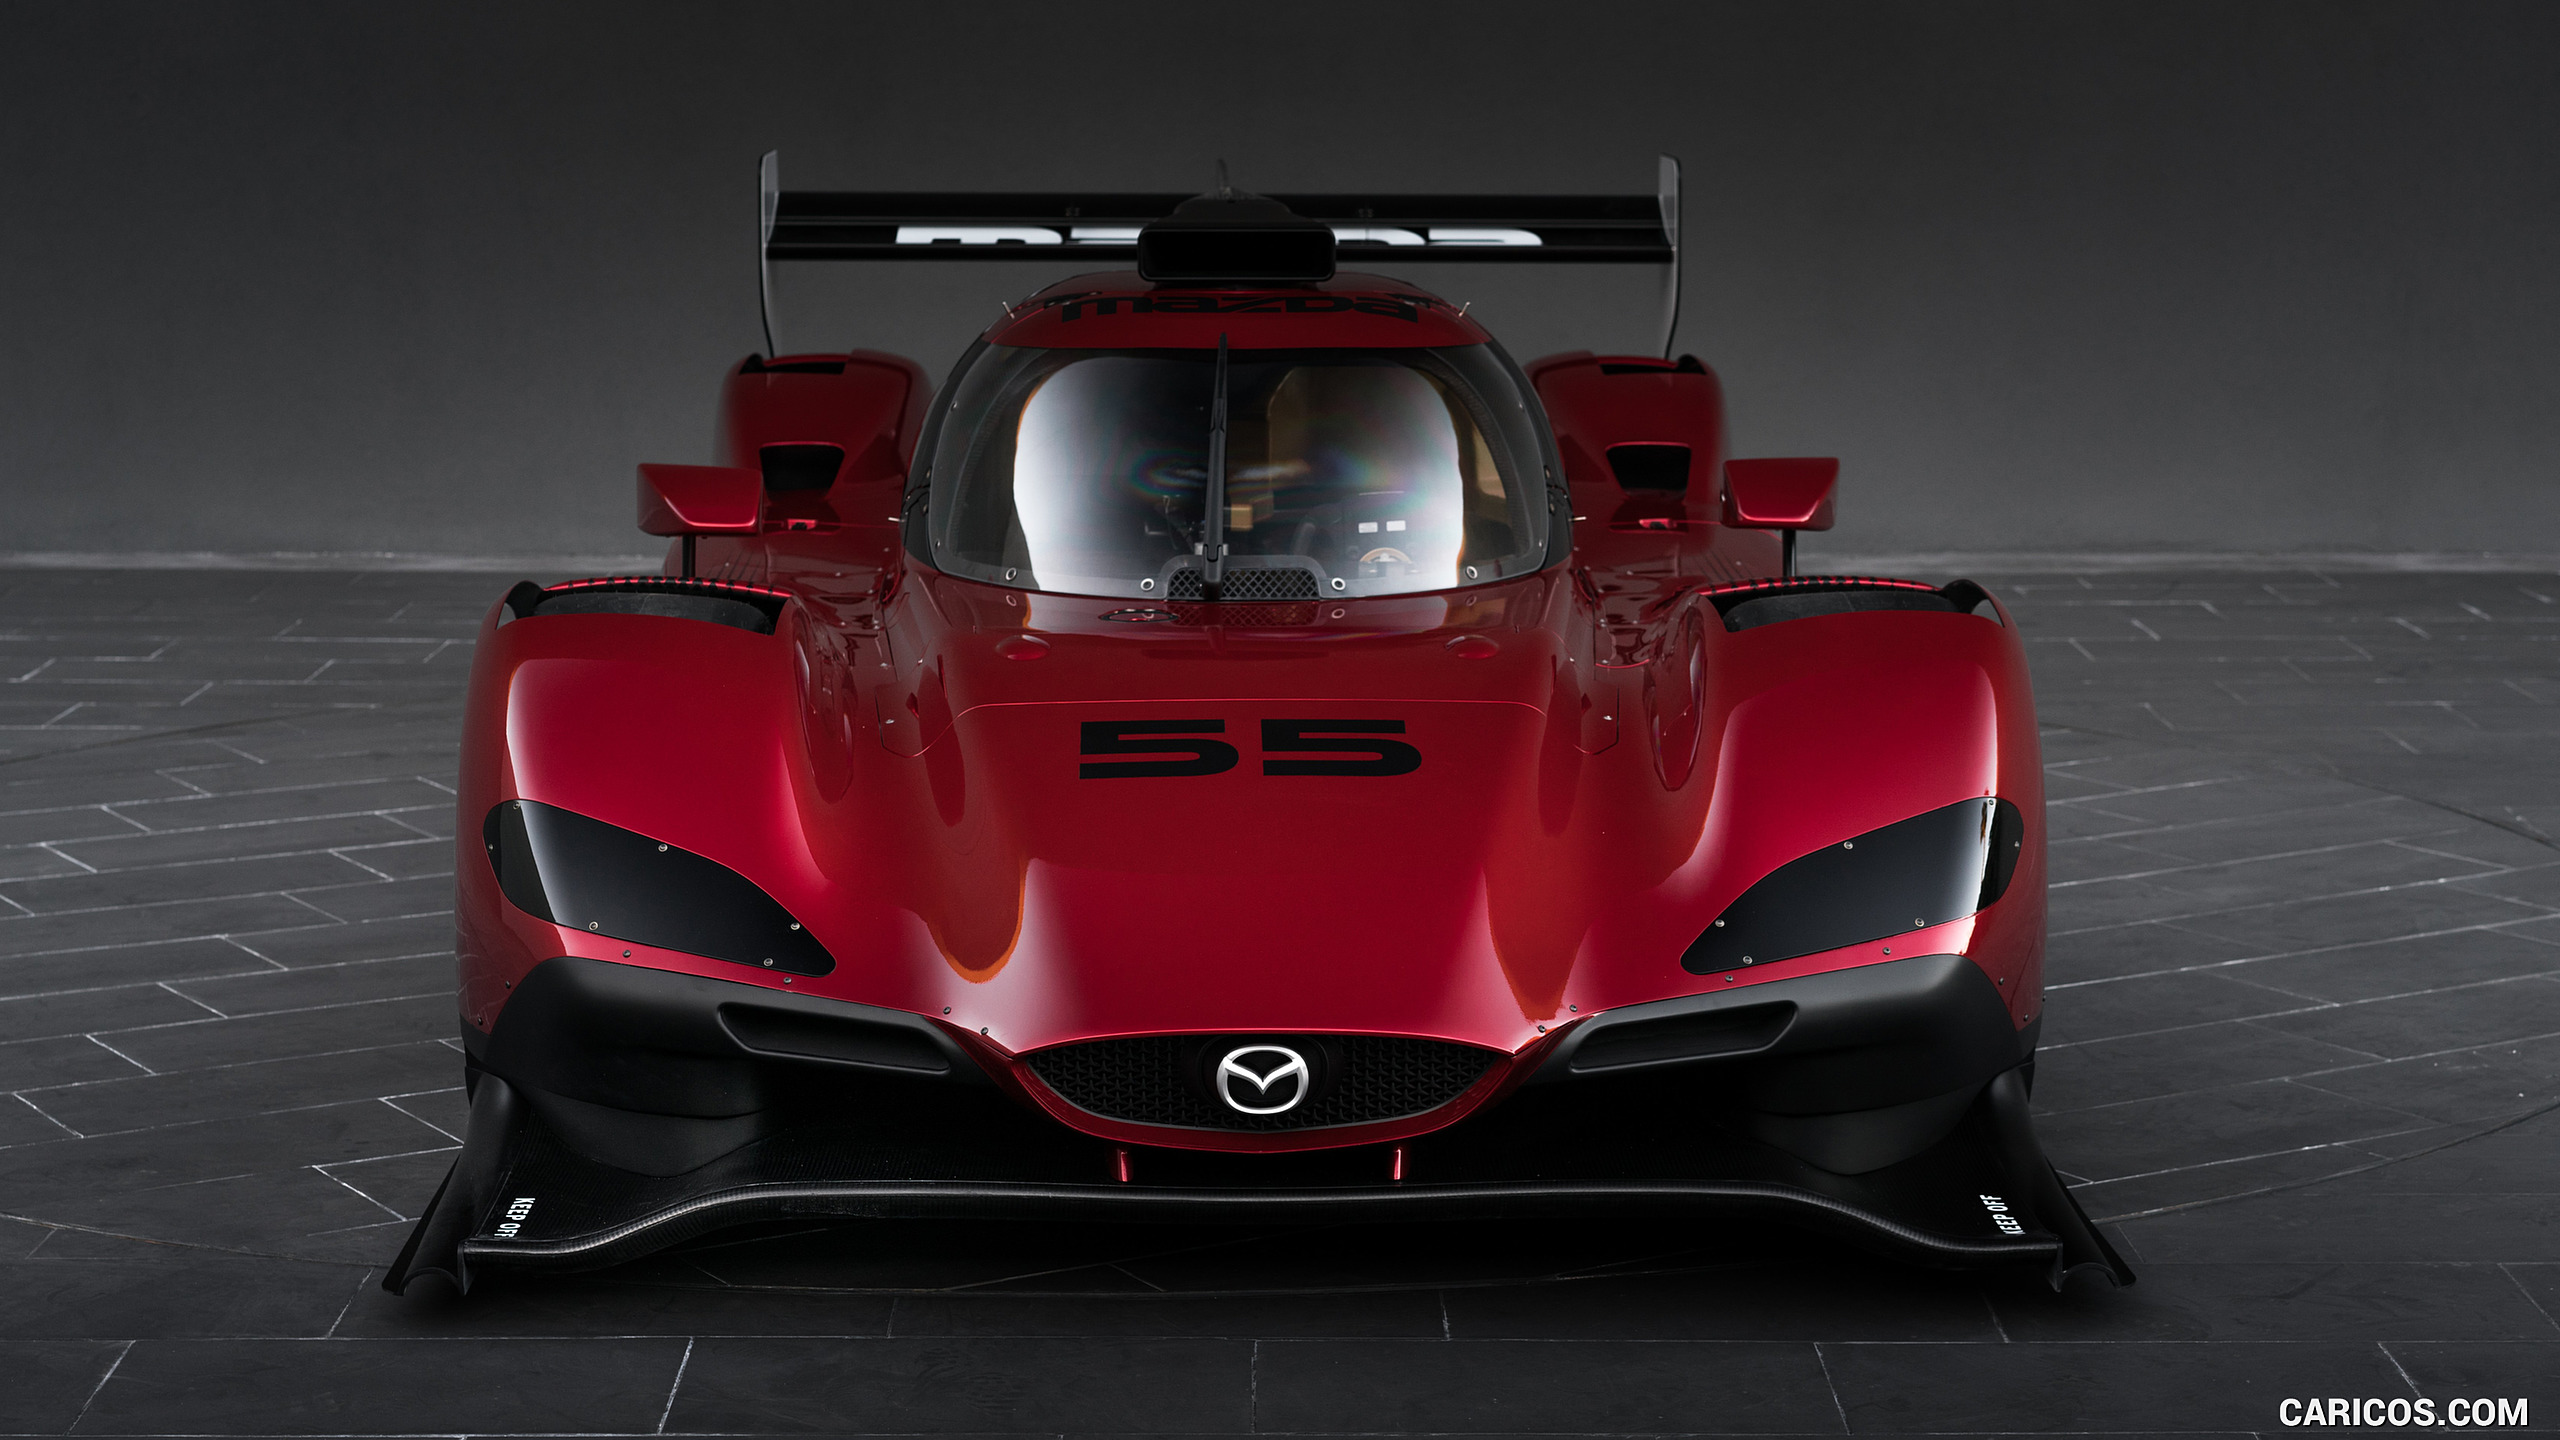 2016 Mazda RT24-P Race Car Concept - Front, #3 of 9